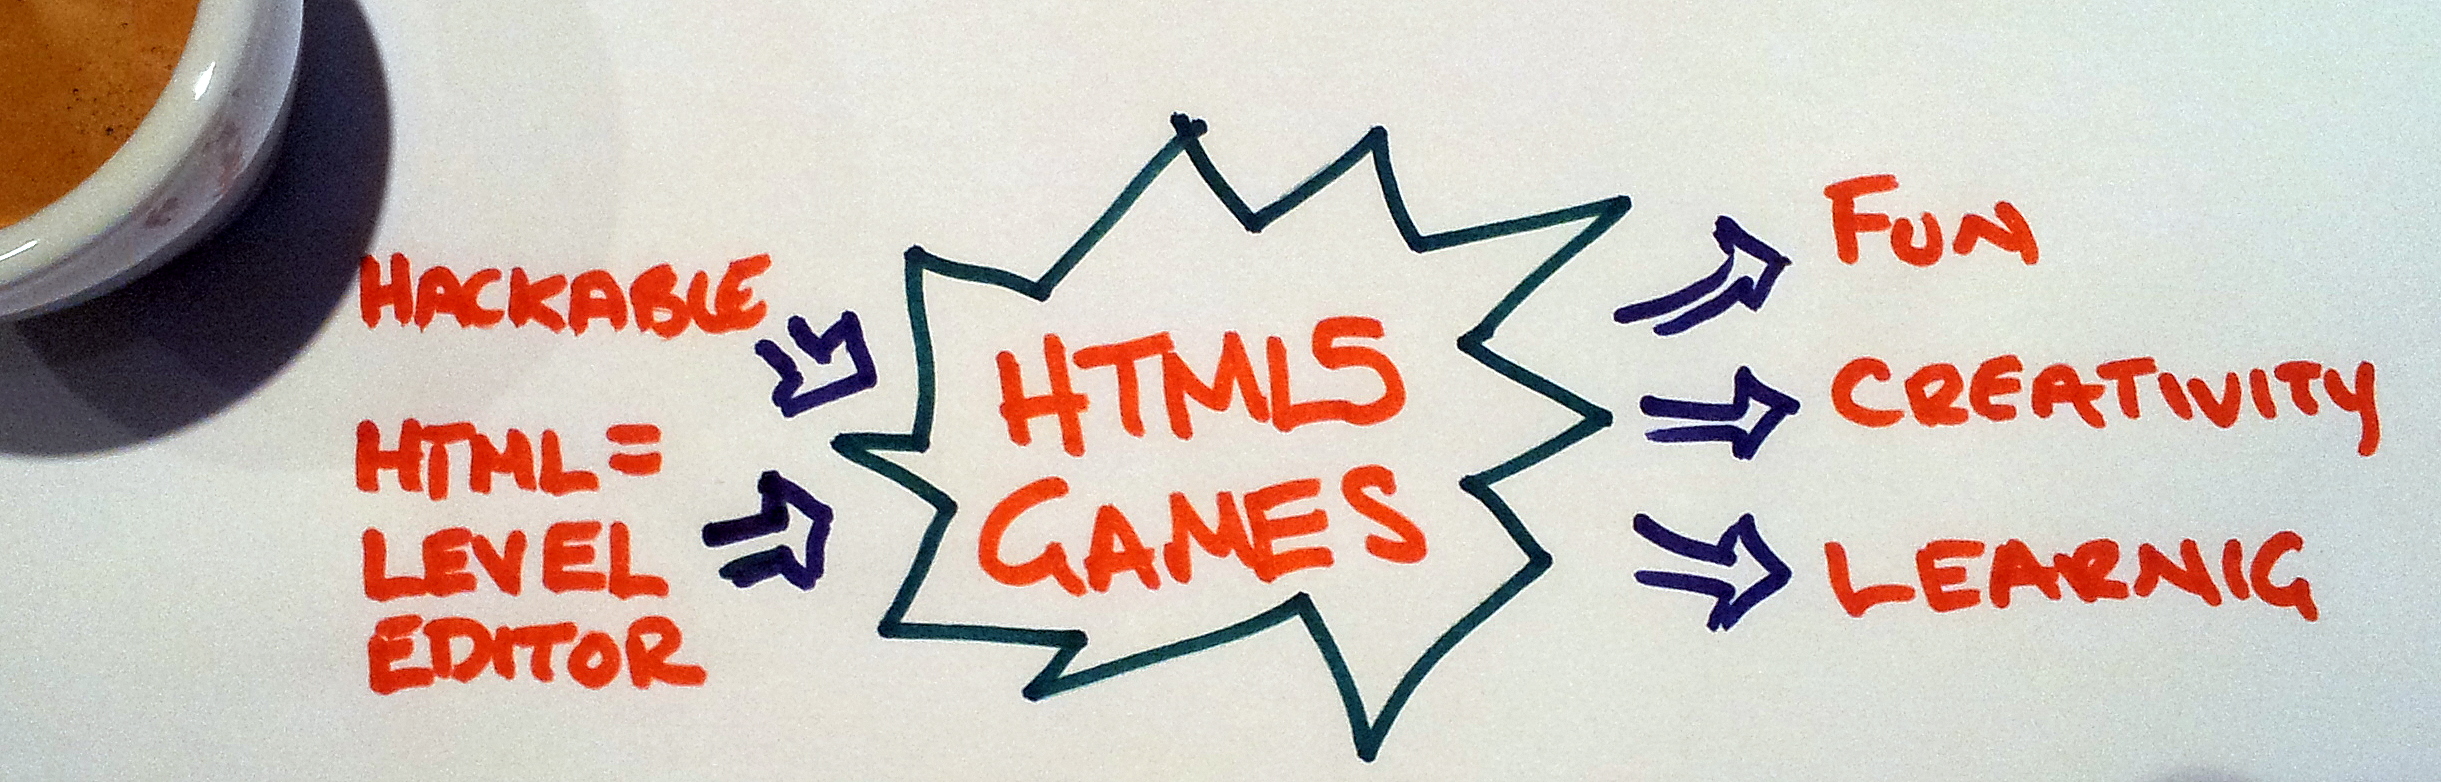 yell0wsuit's blog  Why I make the HTML5 games repo private + new game  addition criteria